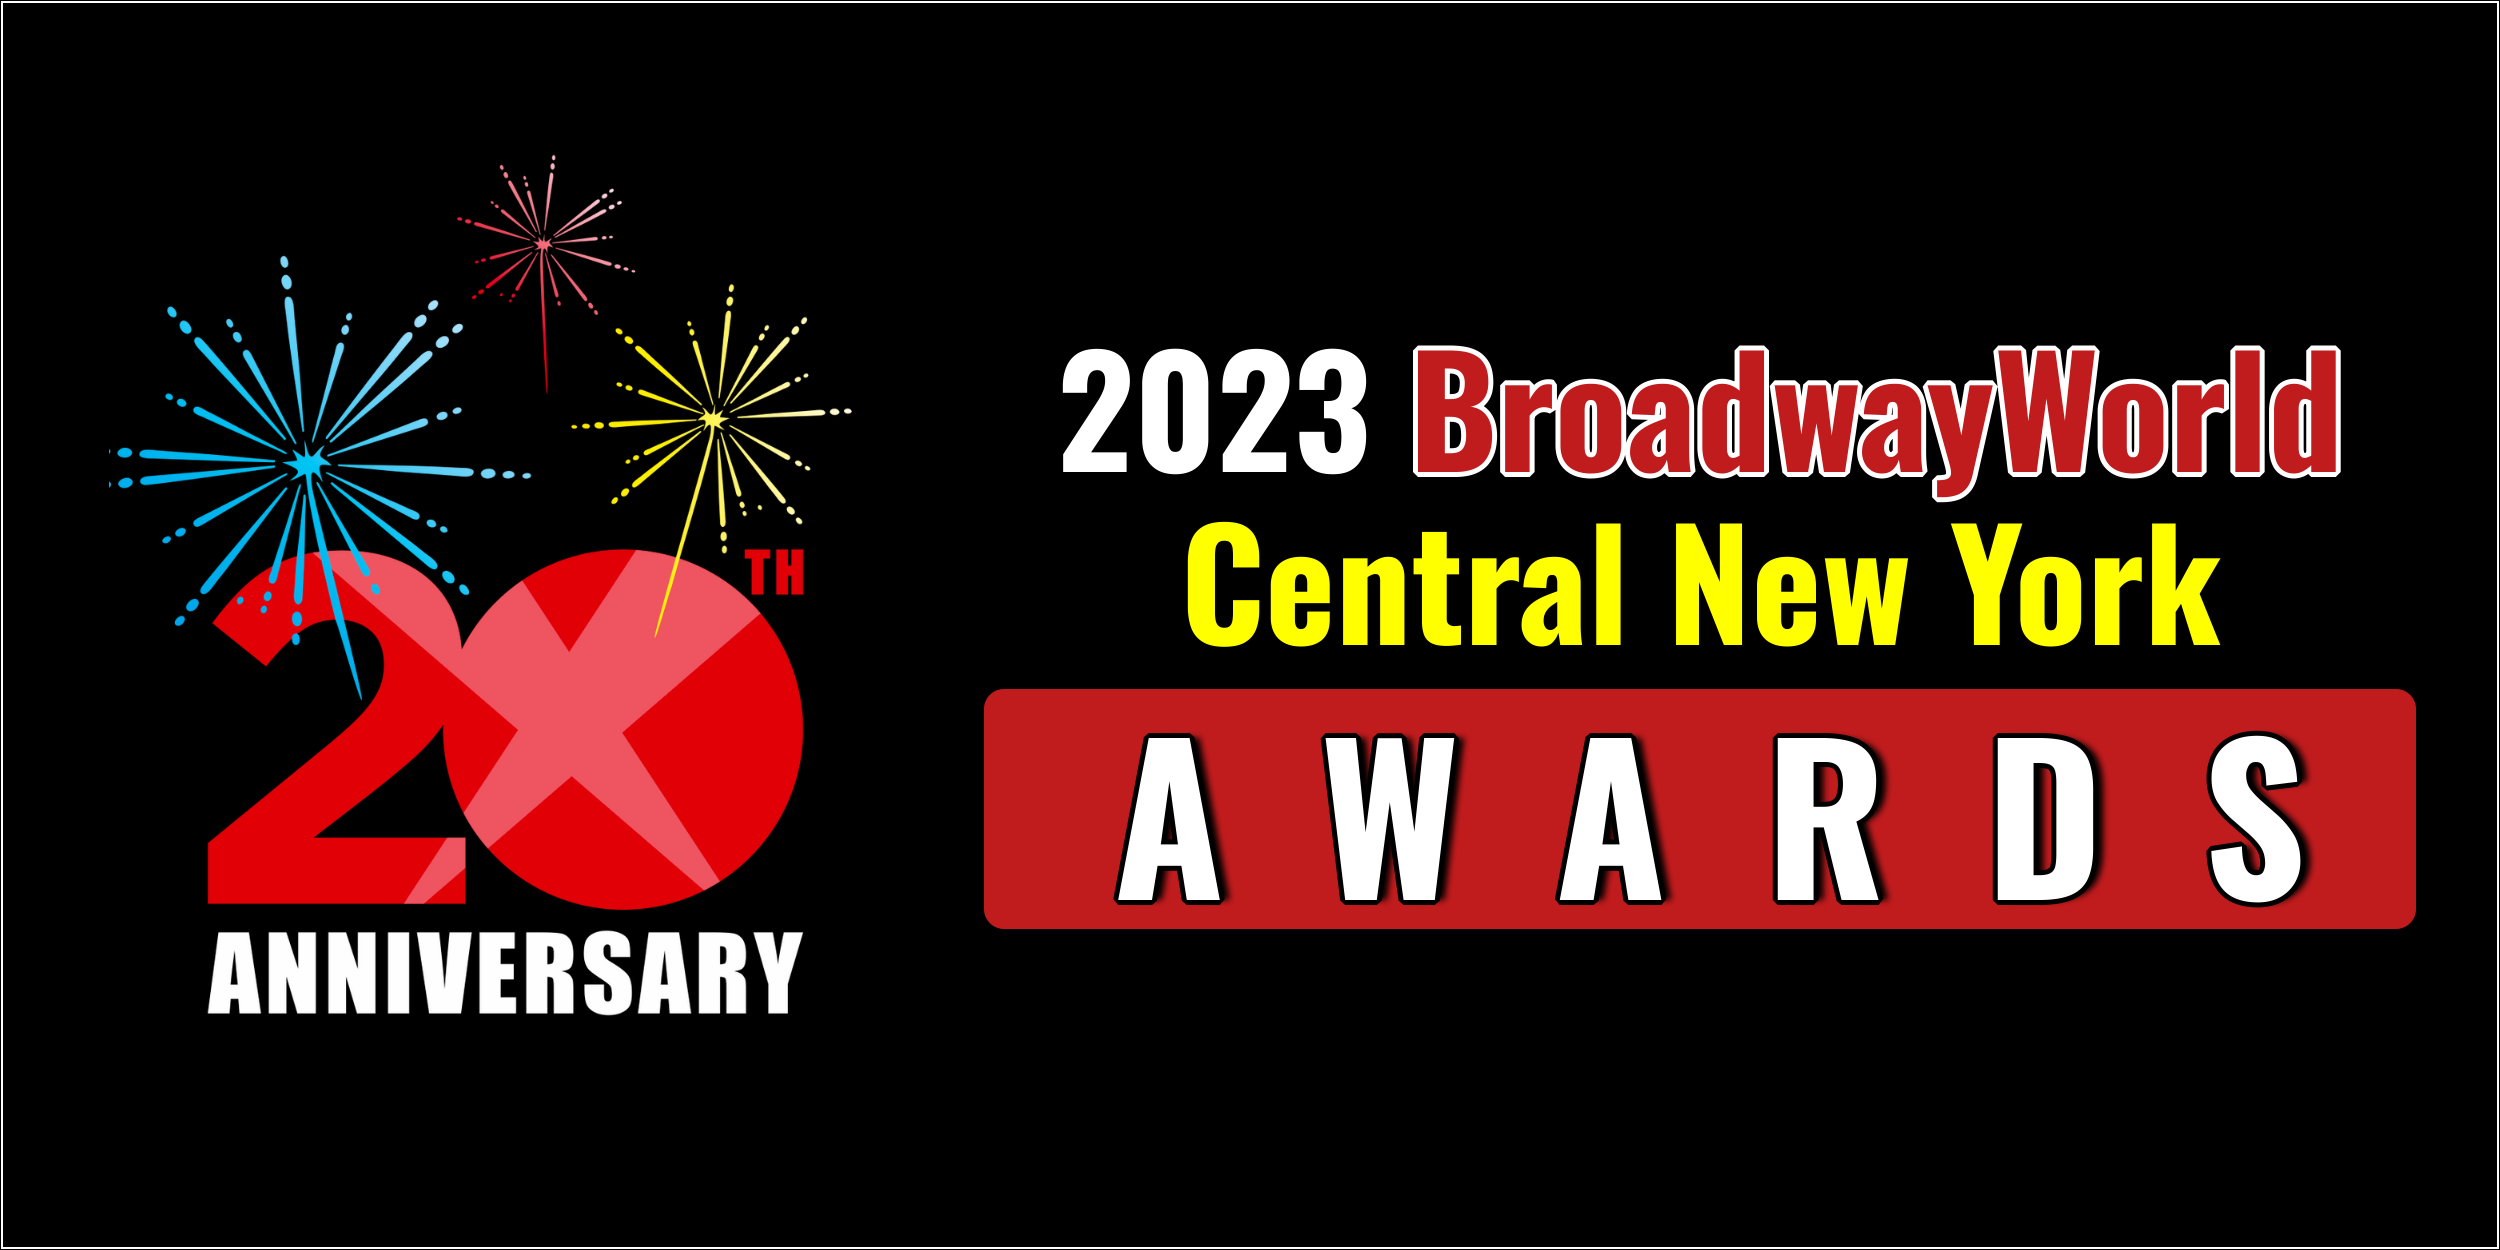 Latest Standings Announced For The 2023 BroadwayWorld Central New York Awards;  Leads Favorite Local Theatre! 